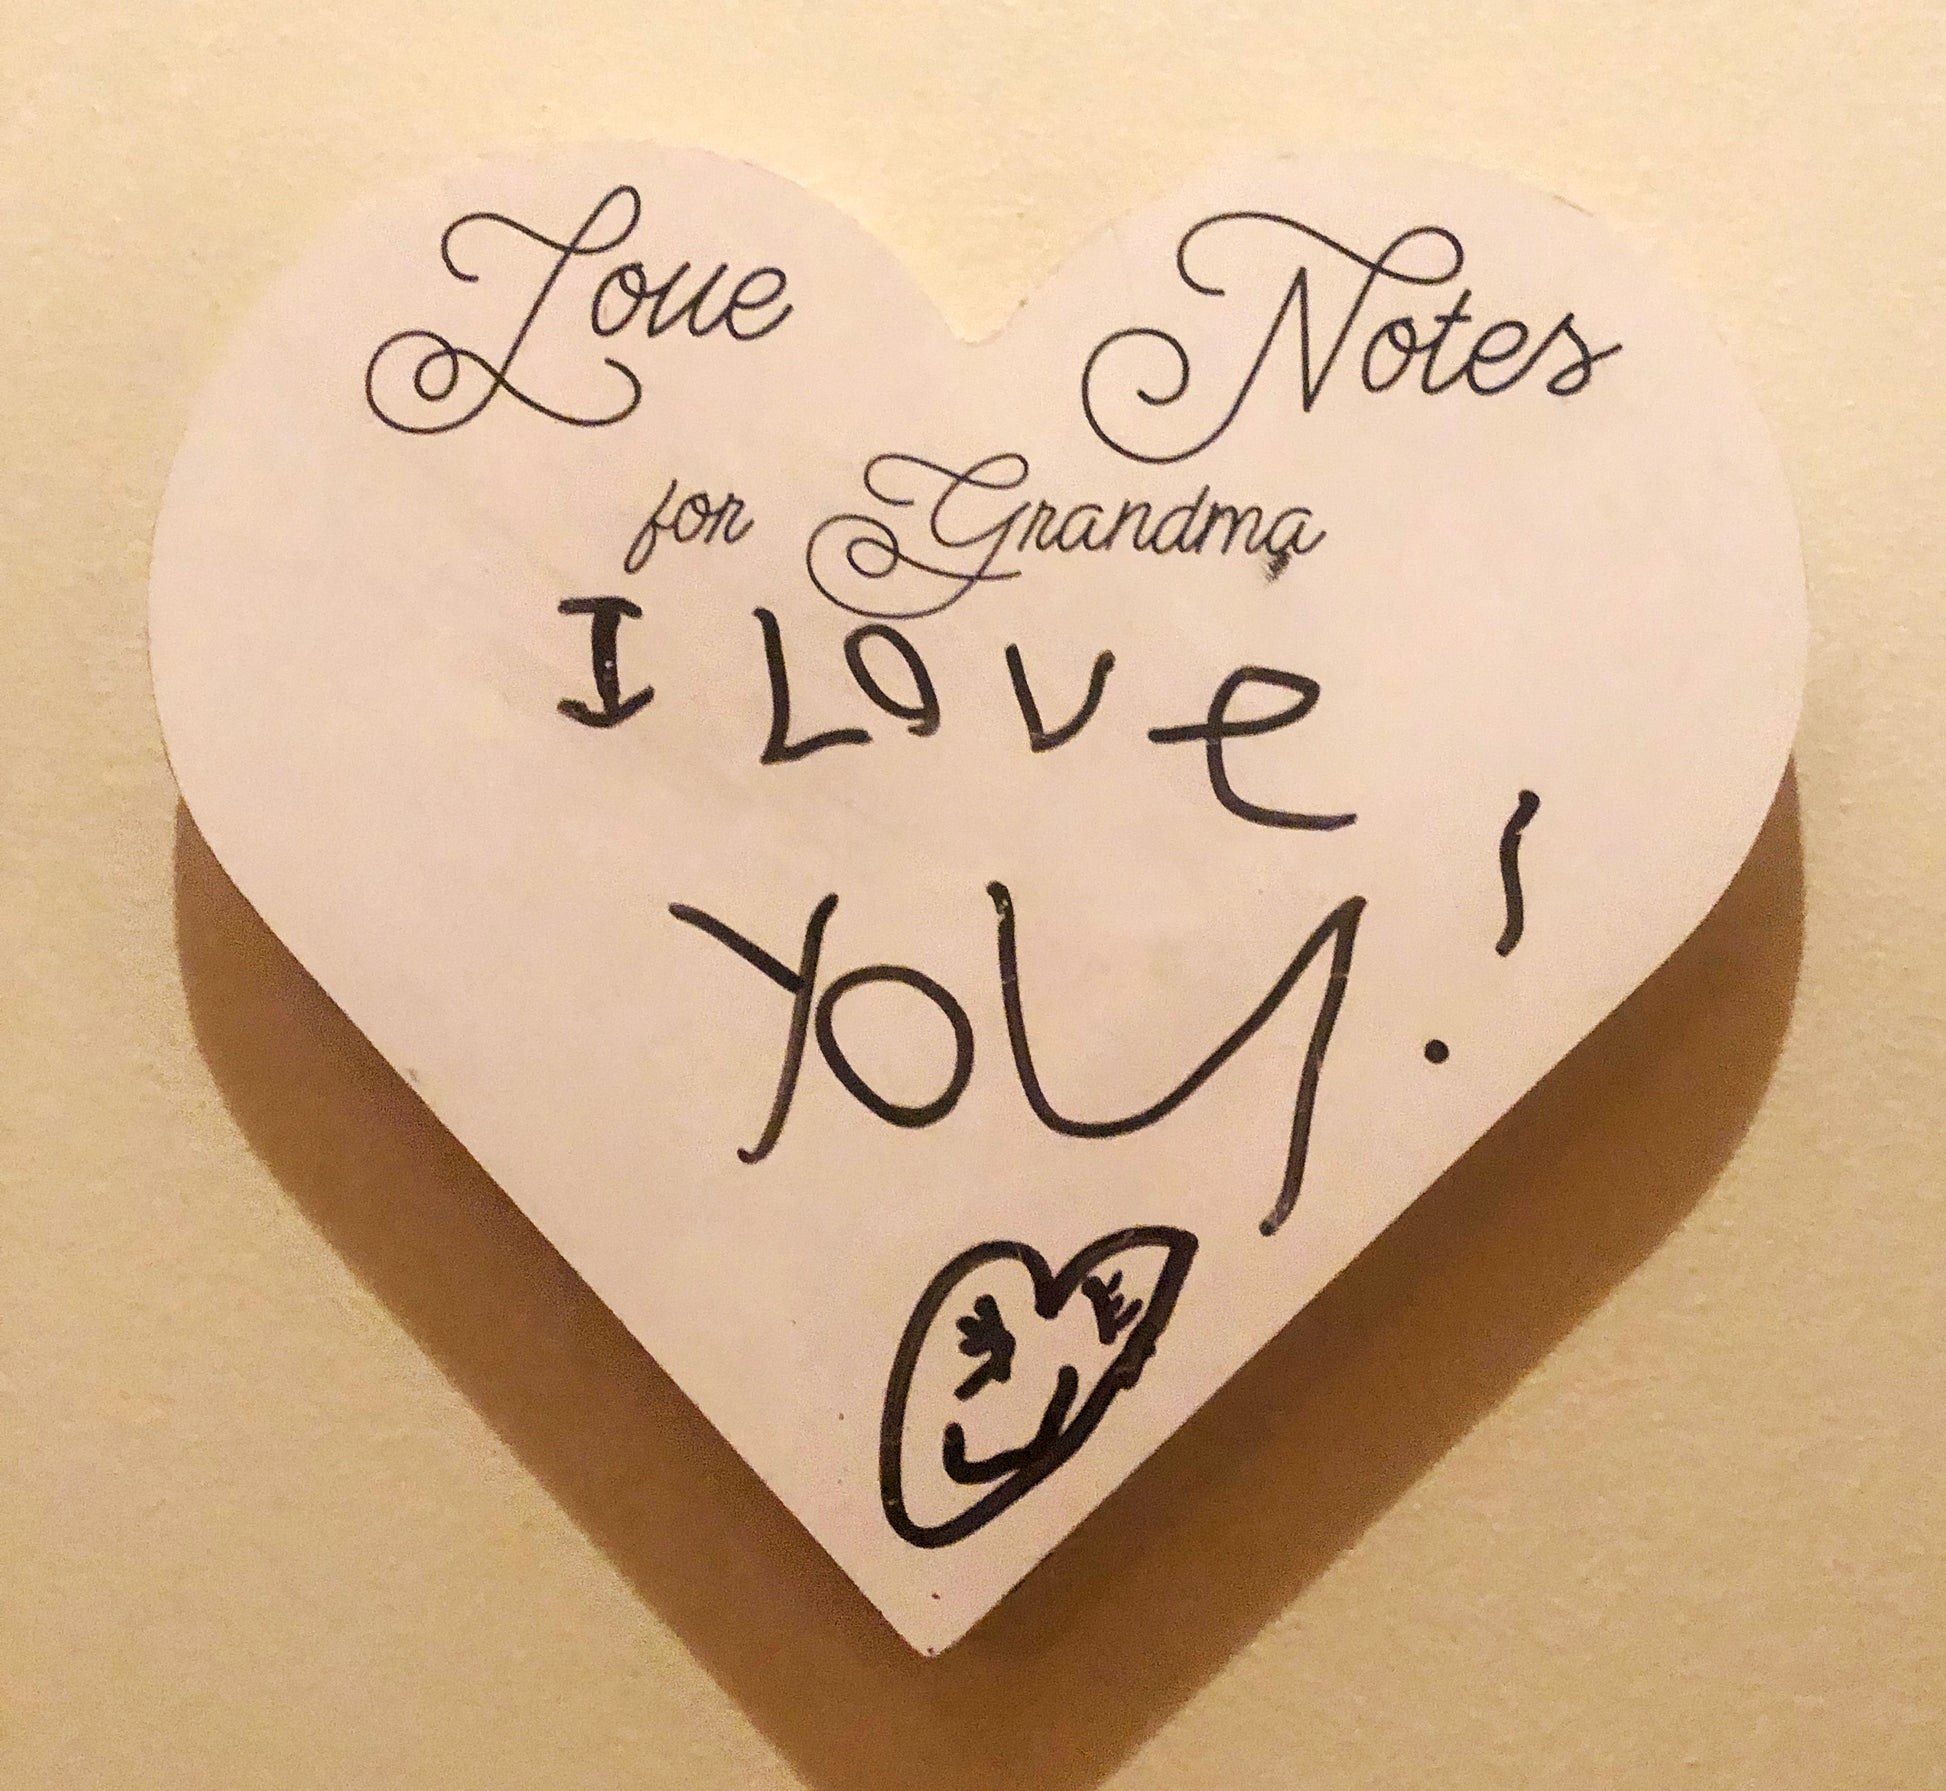 Heart shaped love Notes Message Board for Grandma